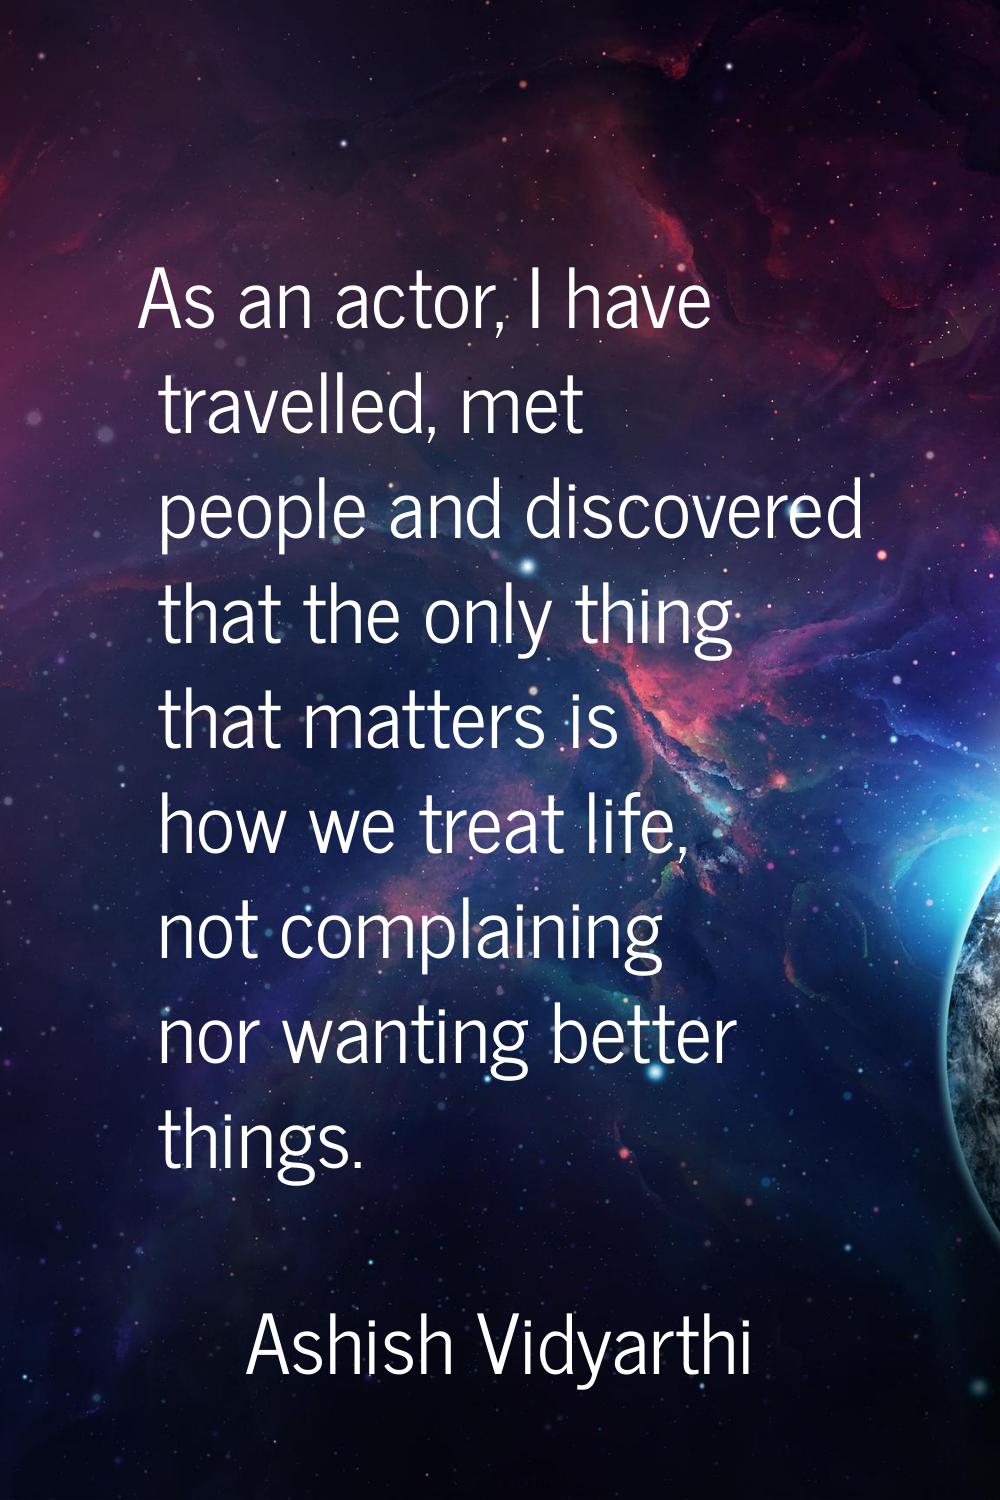 As an actor, I have travelled, met people and discovered that the only thing that matters is how we